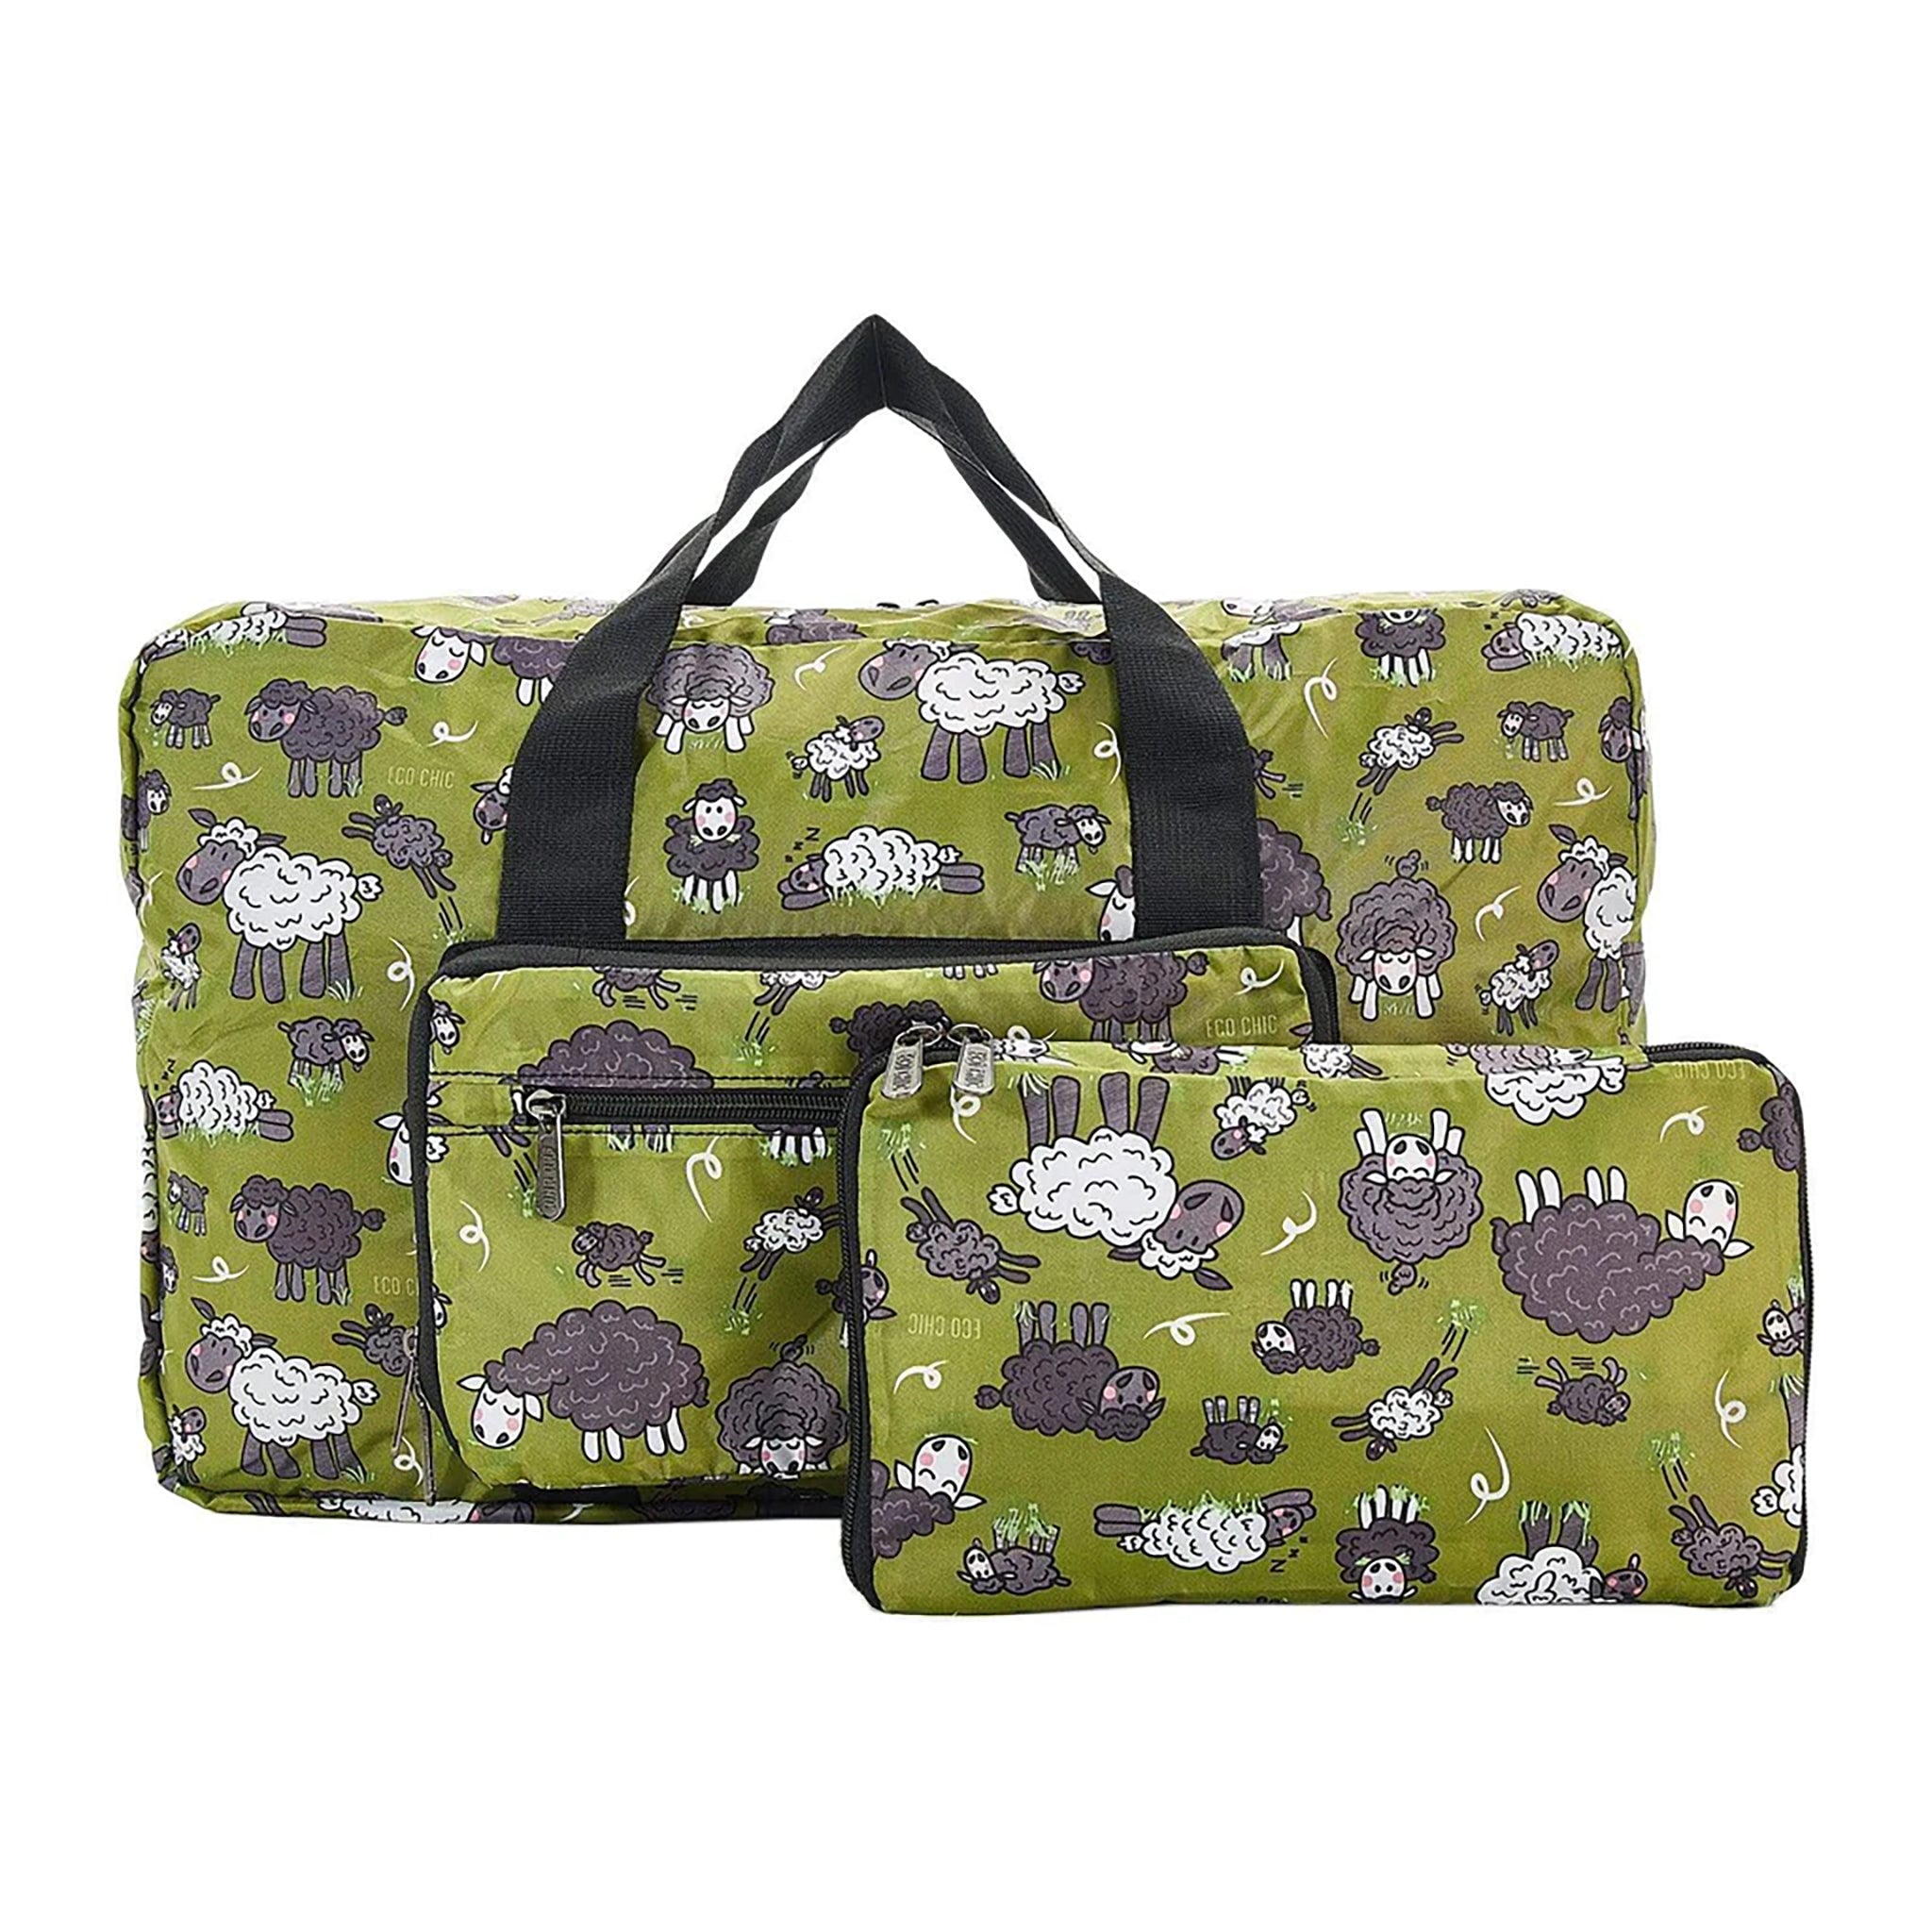 Foldable green holdall made with recycled plastic